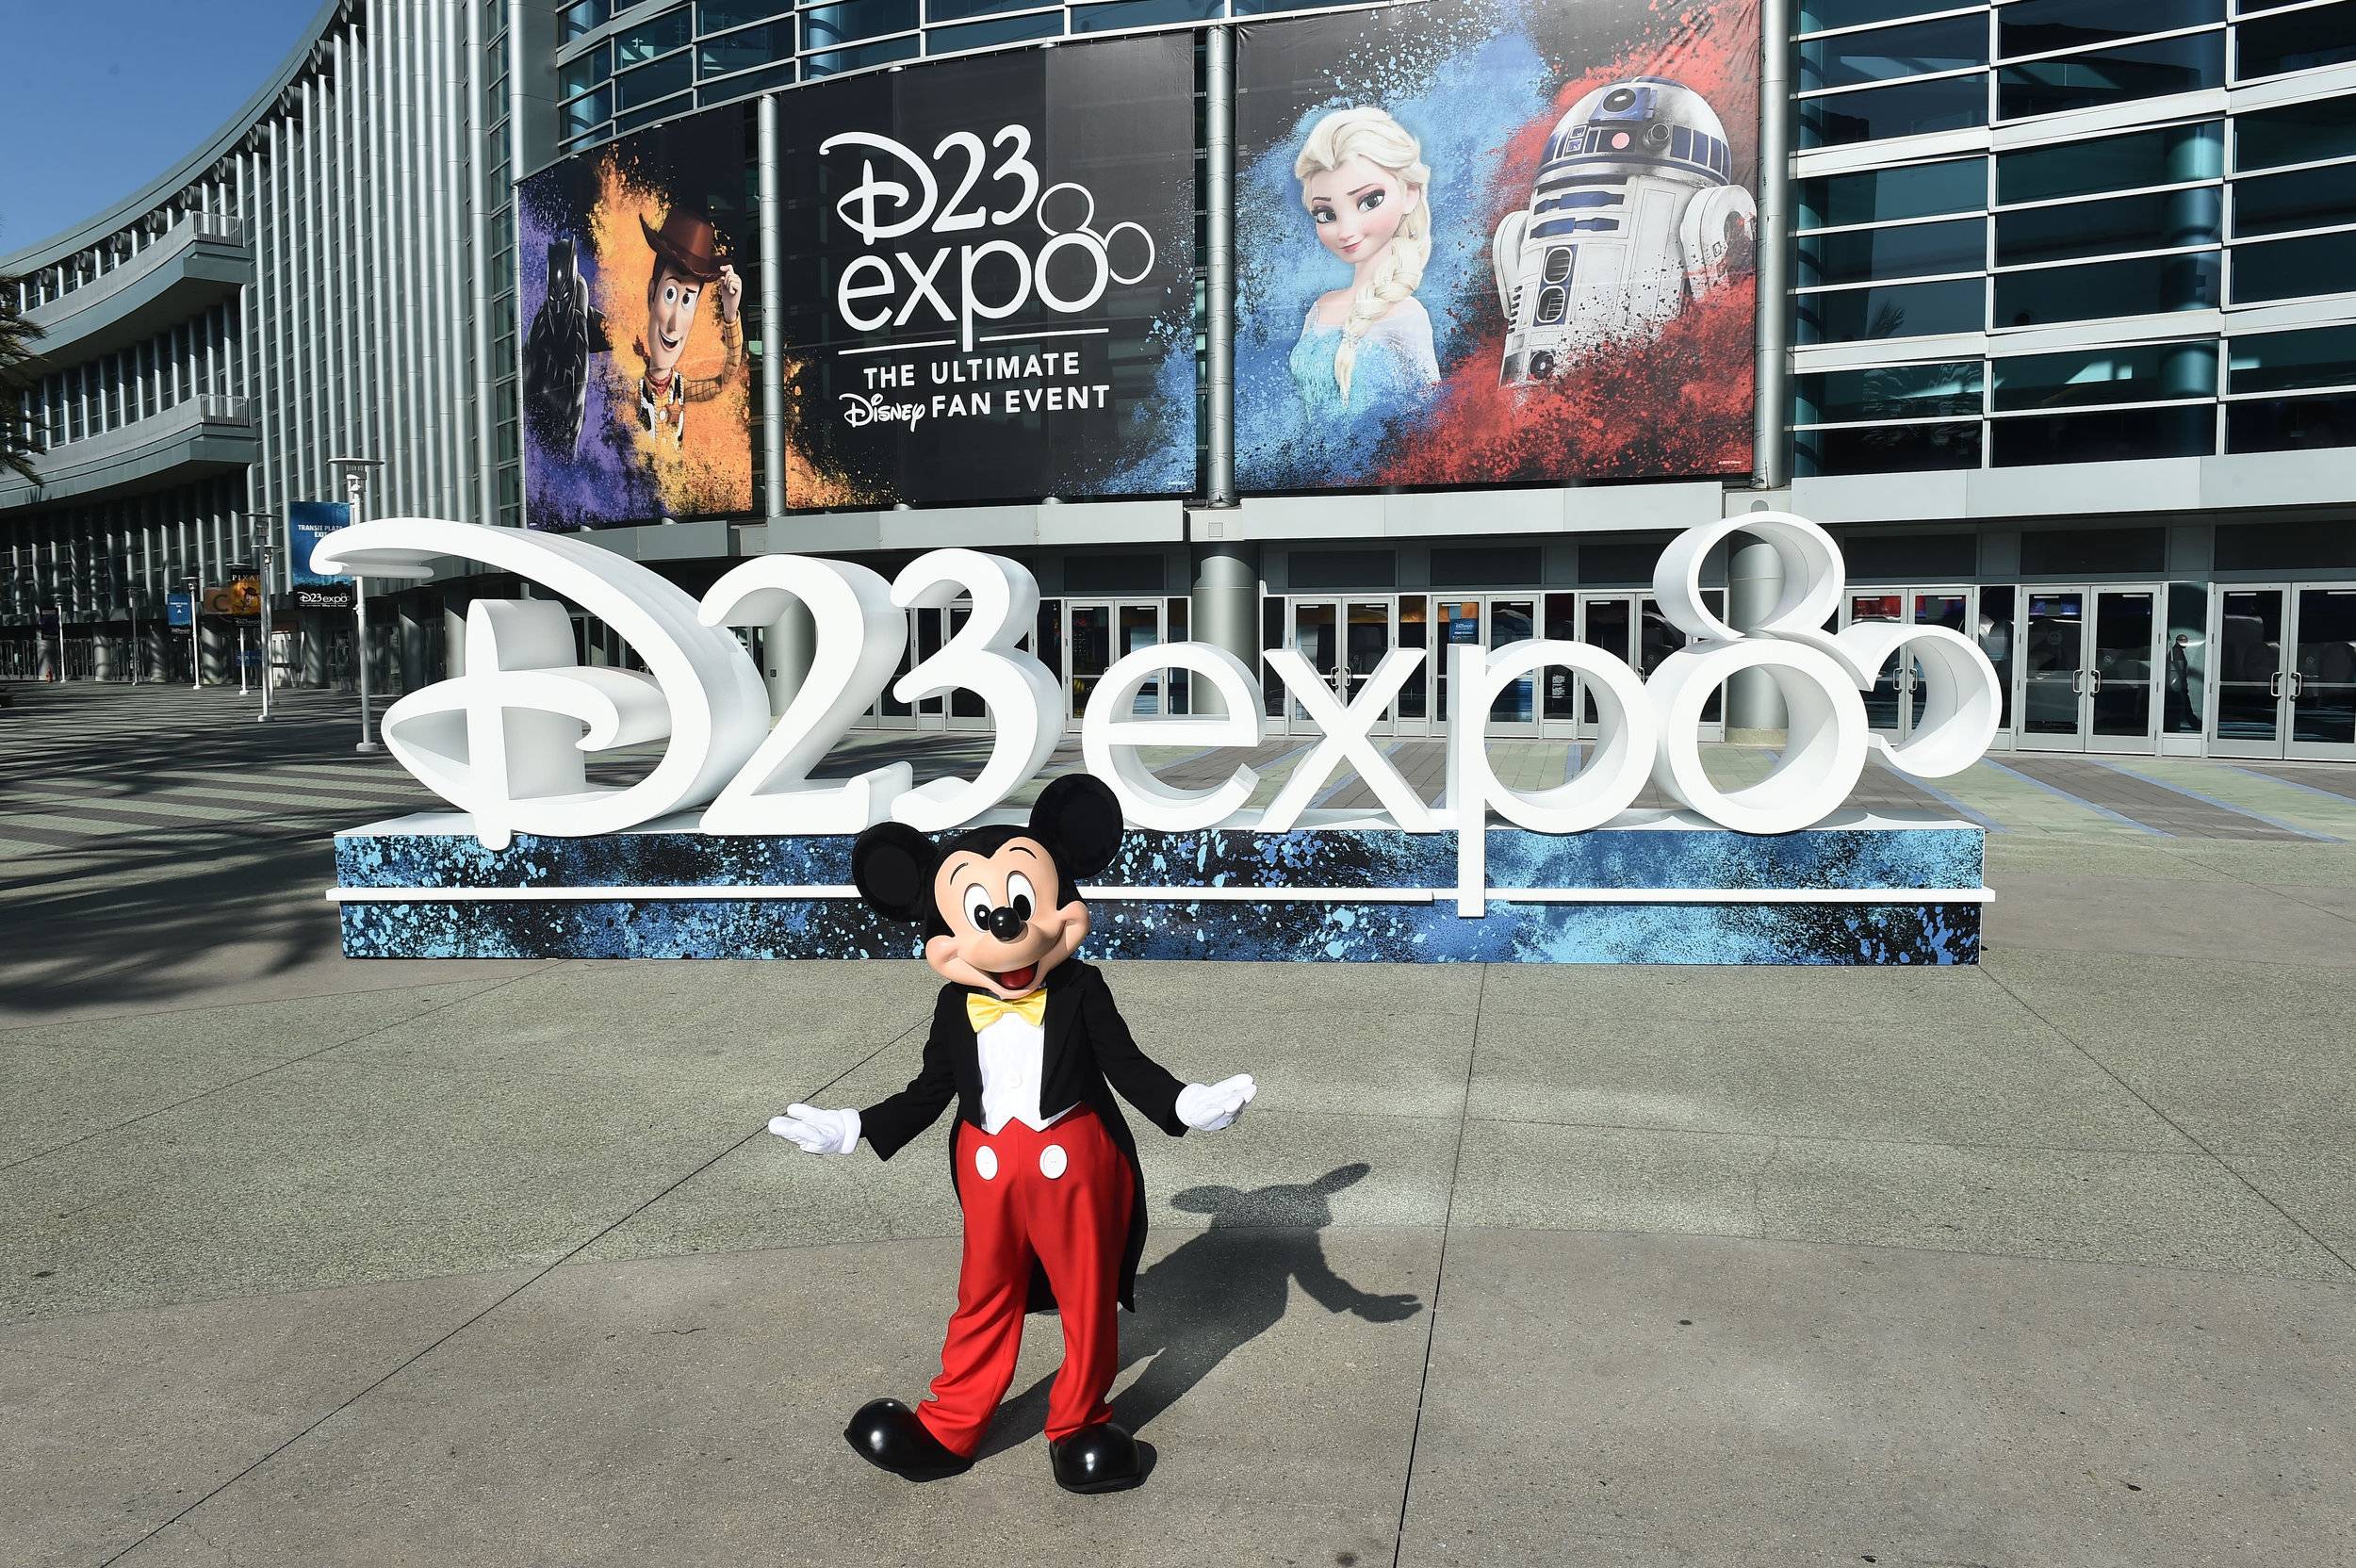 The last D23 Expo was held in 2019